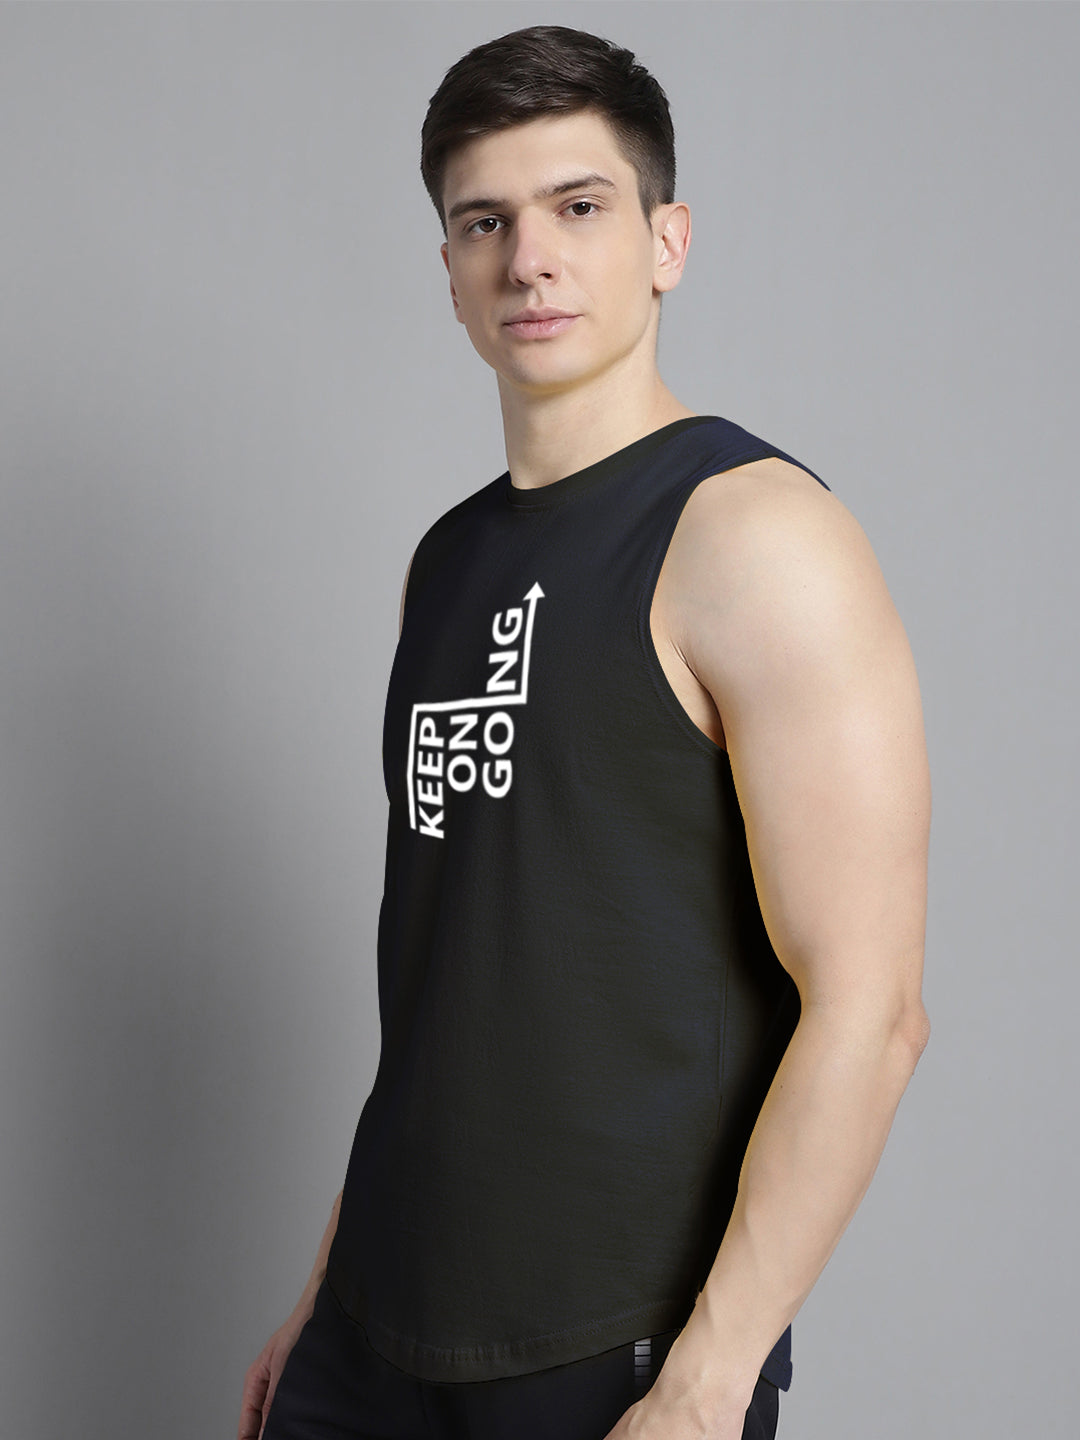 Fbar Keep On Going printed Pure Cotton Training Vest - Friskers